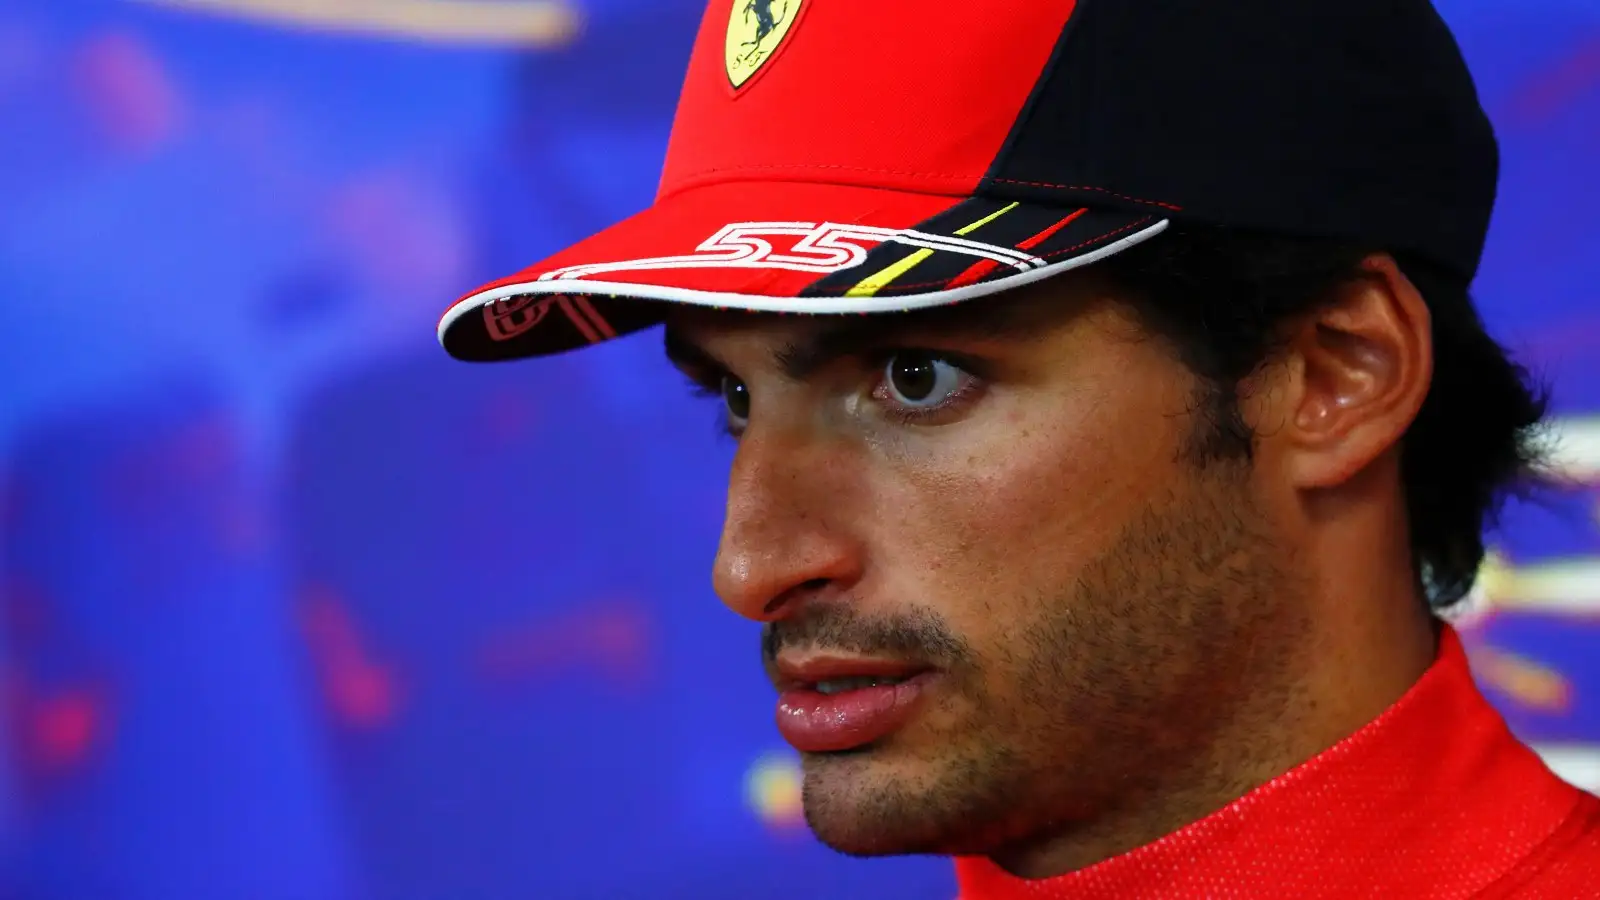 Carlos Sainz staring during a press conference. Spa, August 2022.